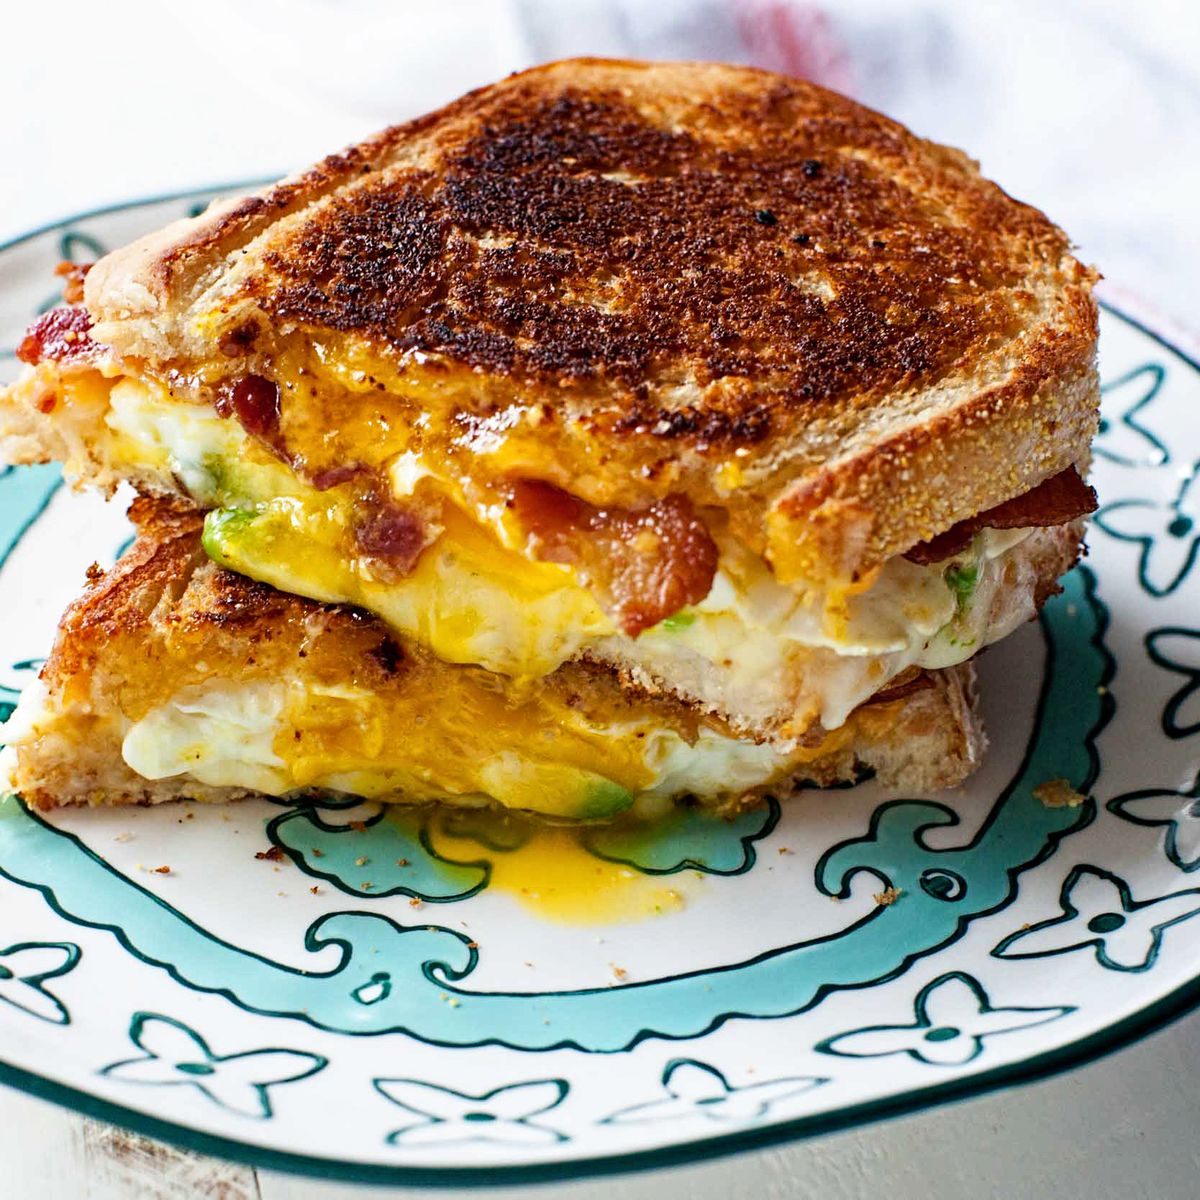 https://hips.hearstapps.com/thepioneerwoman/wp-content/uploads/2015/09/ultimate-grilled-cheese-00.jpg?crop=0.6668xw:1xh;center,top&resize=1200:*